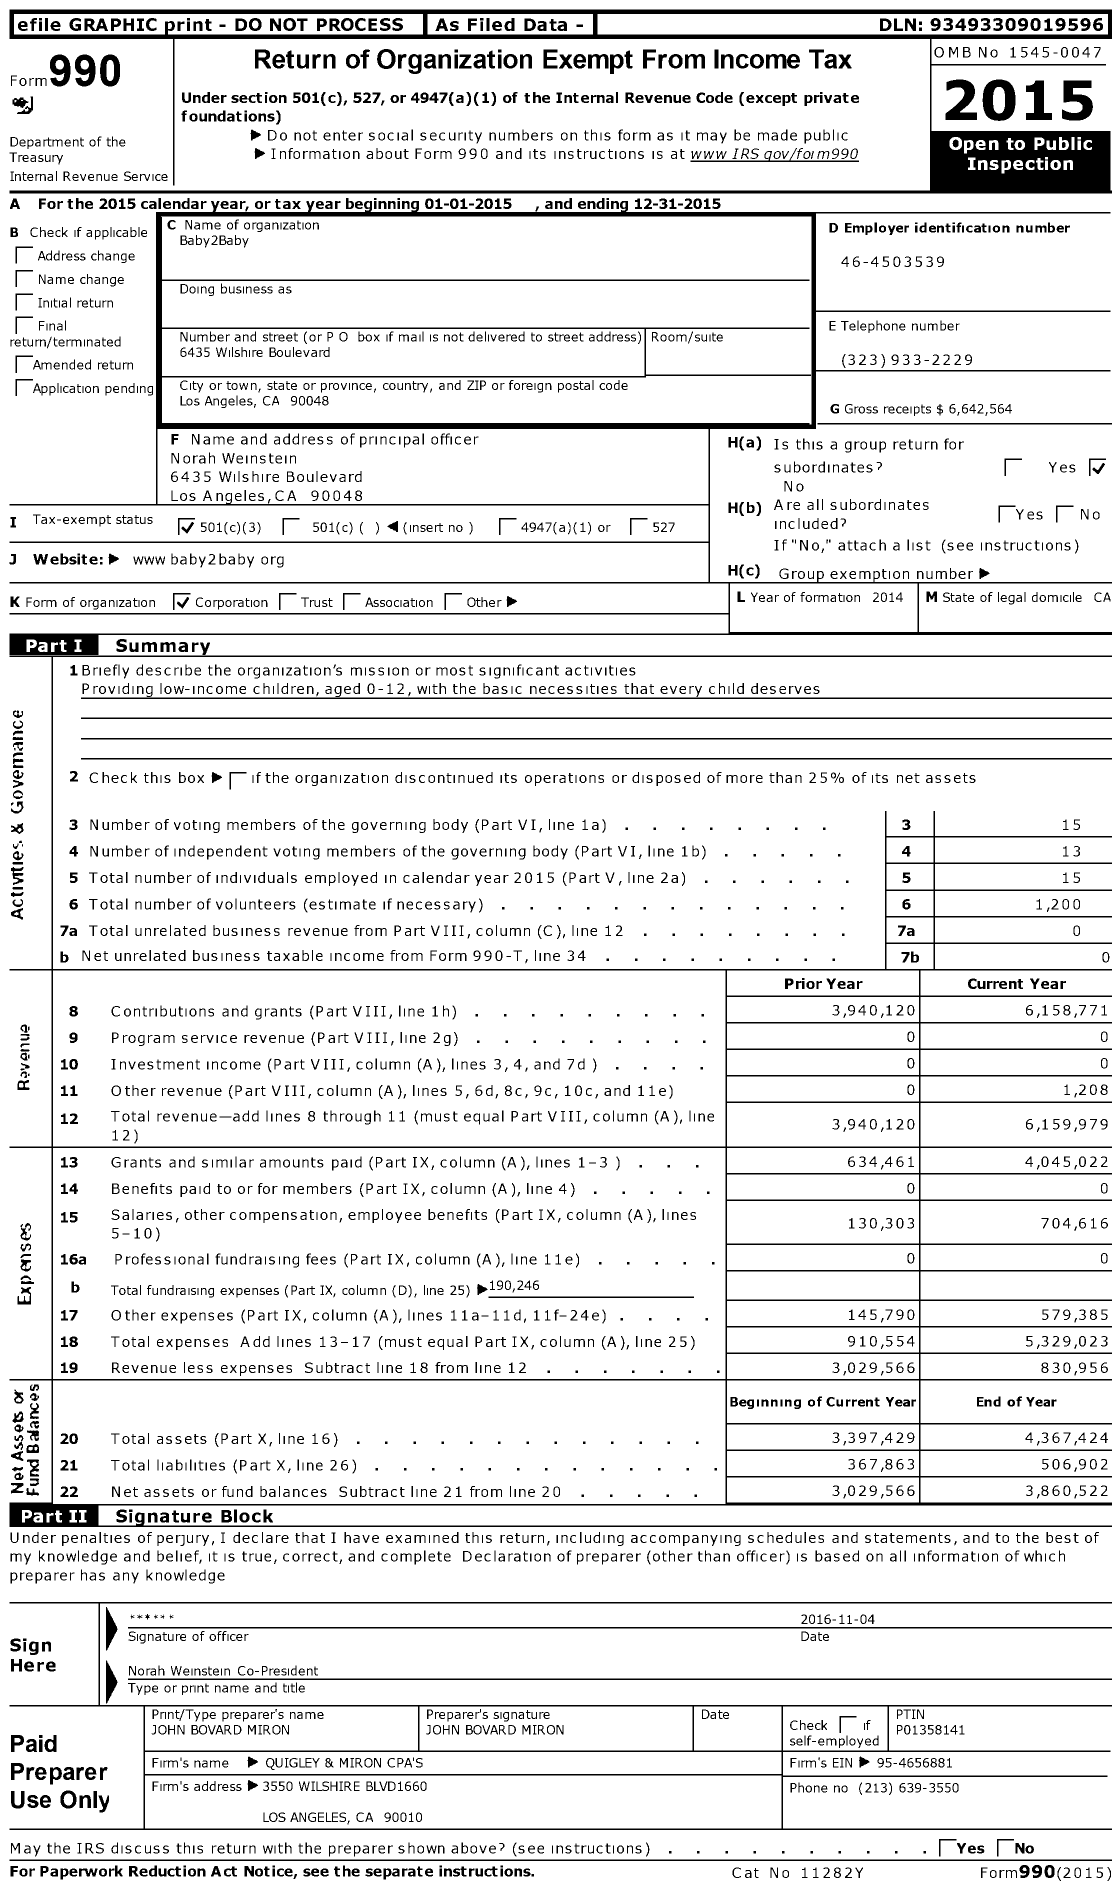 Image of first page of 2015 Form 990 for Baby2Baby